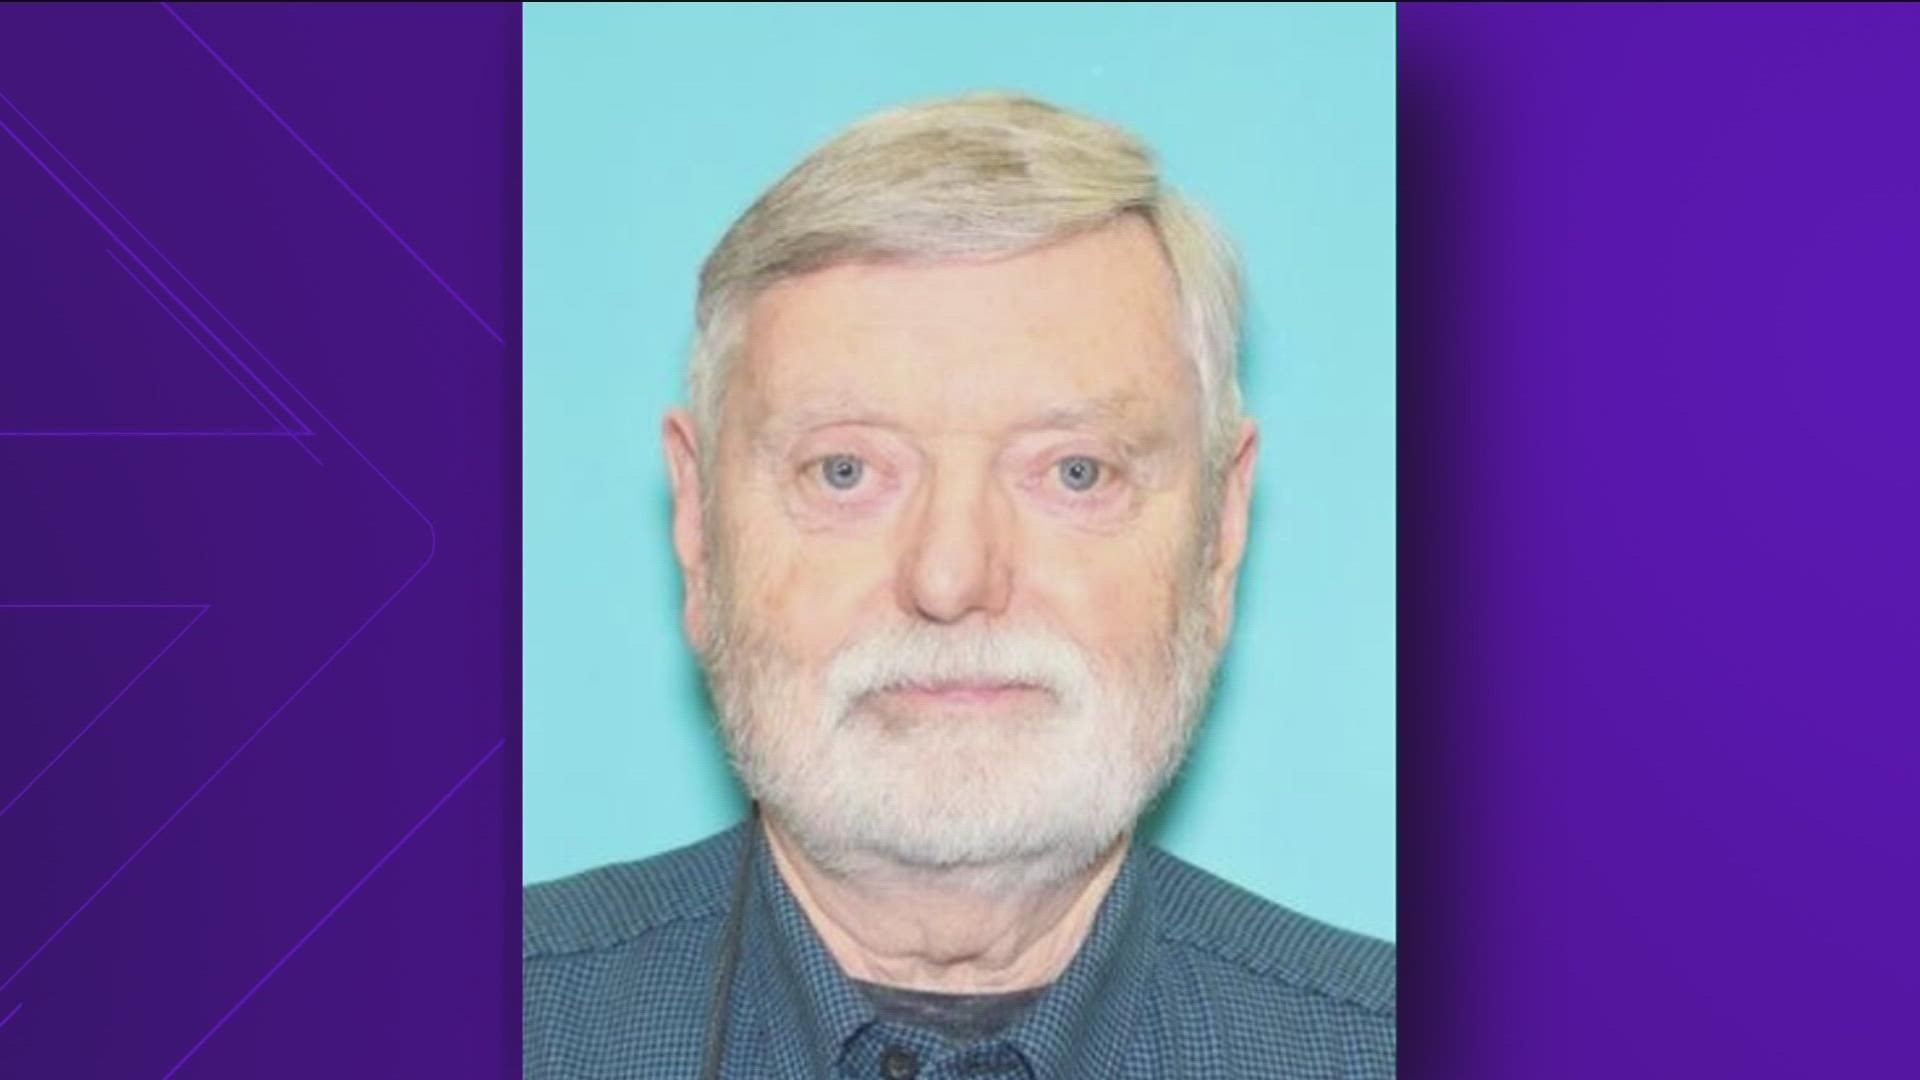 James Daly was reported missing after he was last seen on July 27. Boise Police reported he was found deceased Thursday.